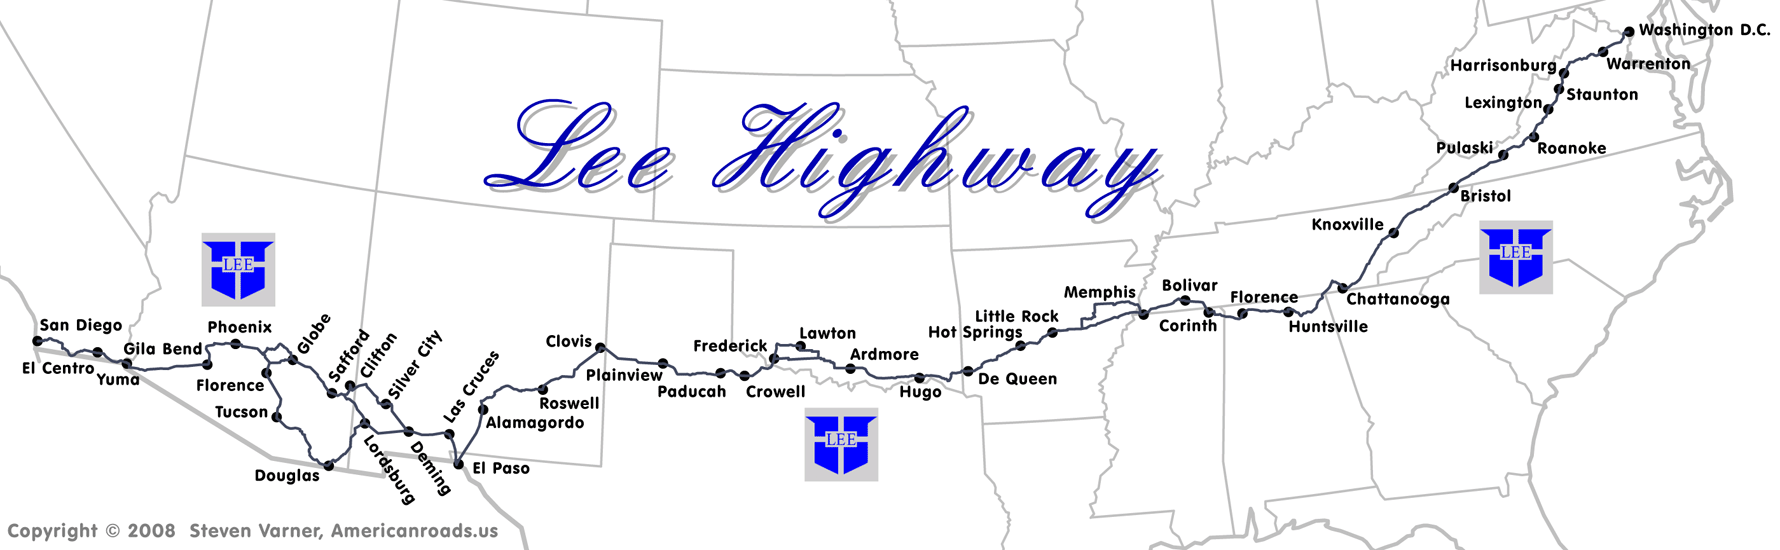 Lee Highway Route Map